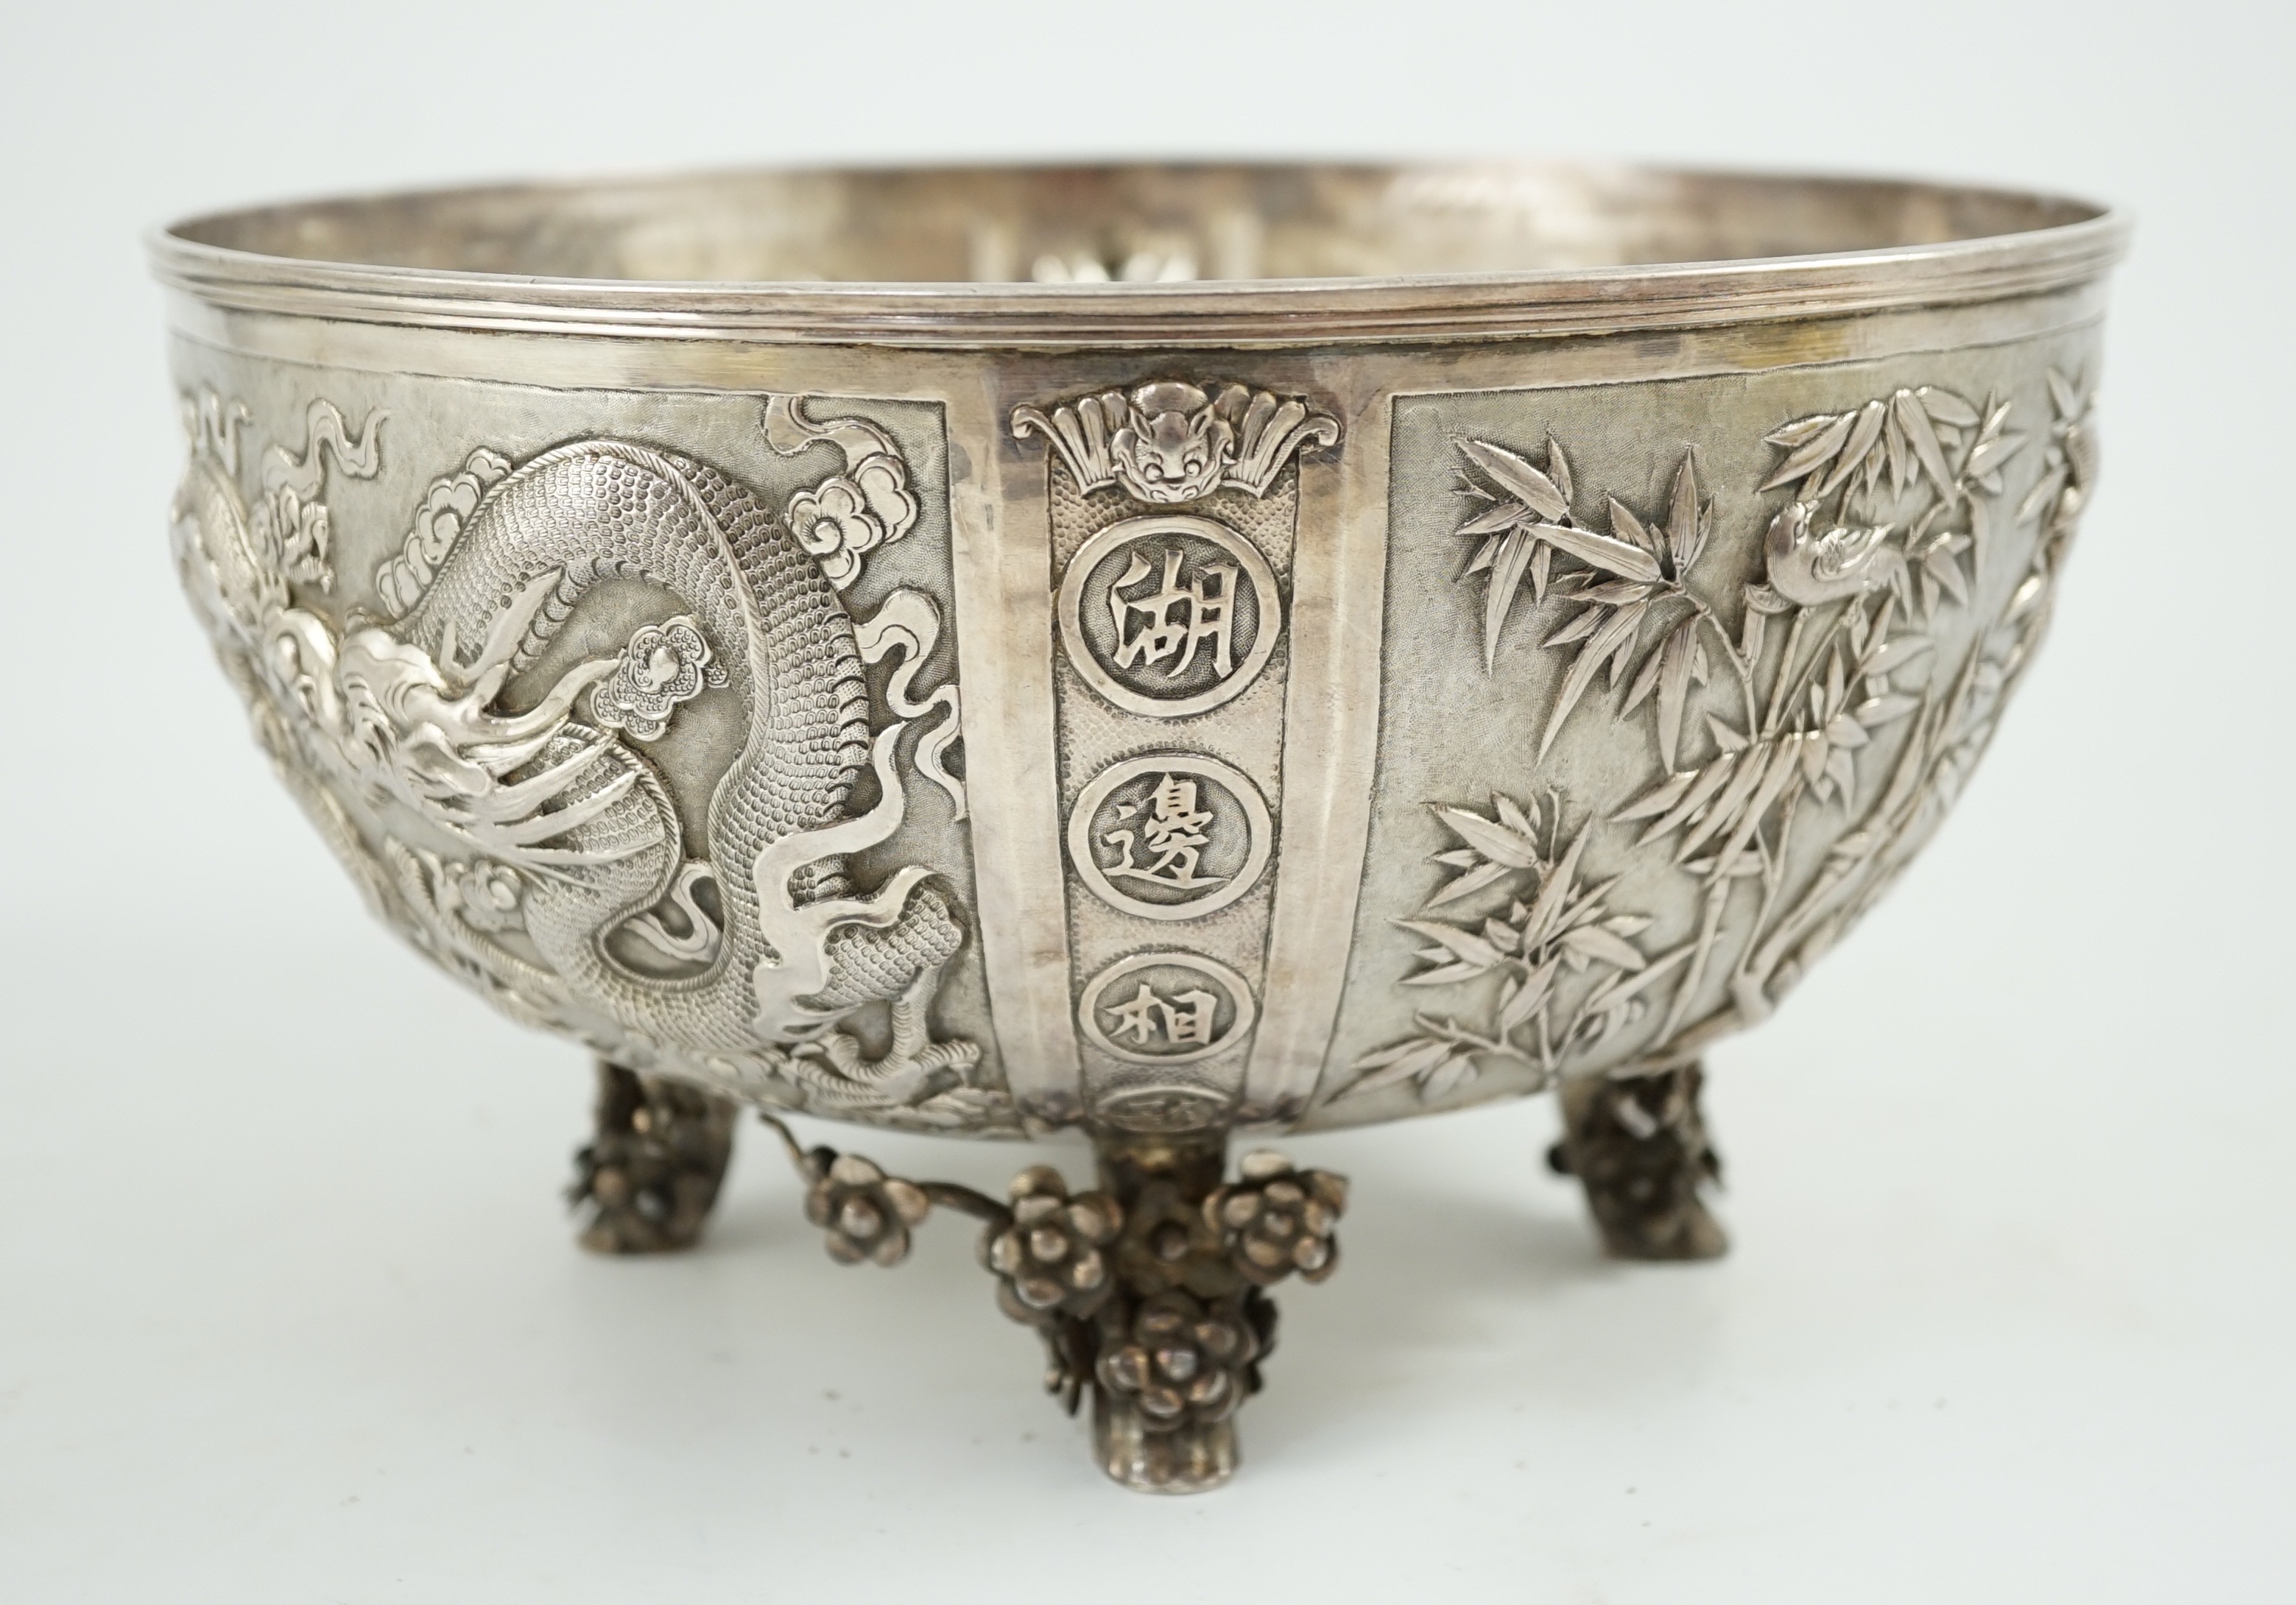 A late 19th/early 20th century Chinese Export silver rose bowl